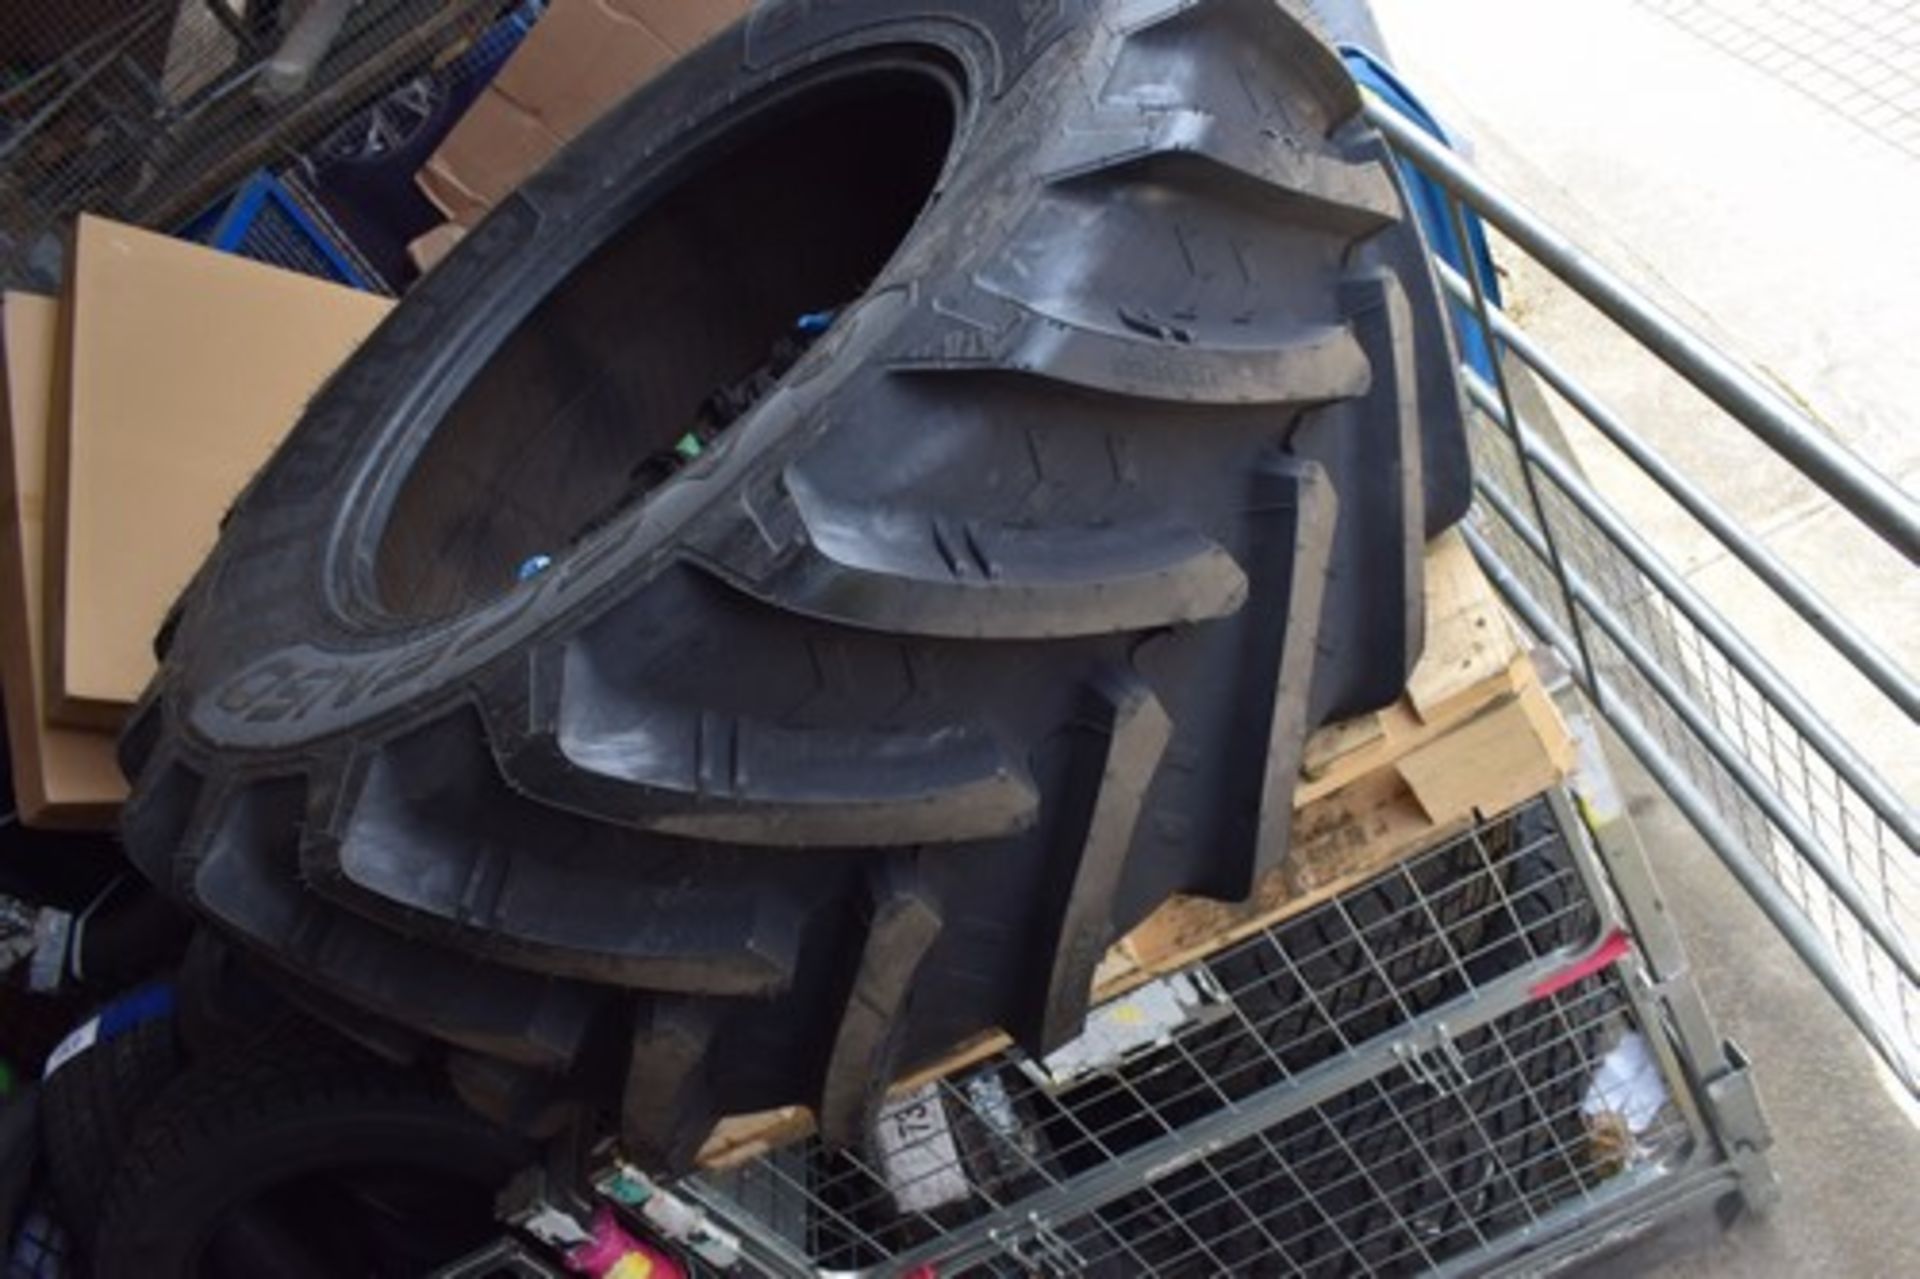 1 x Ascenso TDR650 tractor tyre, size 5401 65R30 - new (P1) - Image 2 of 2